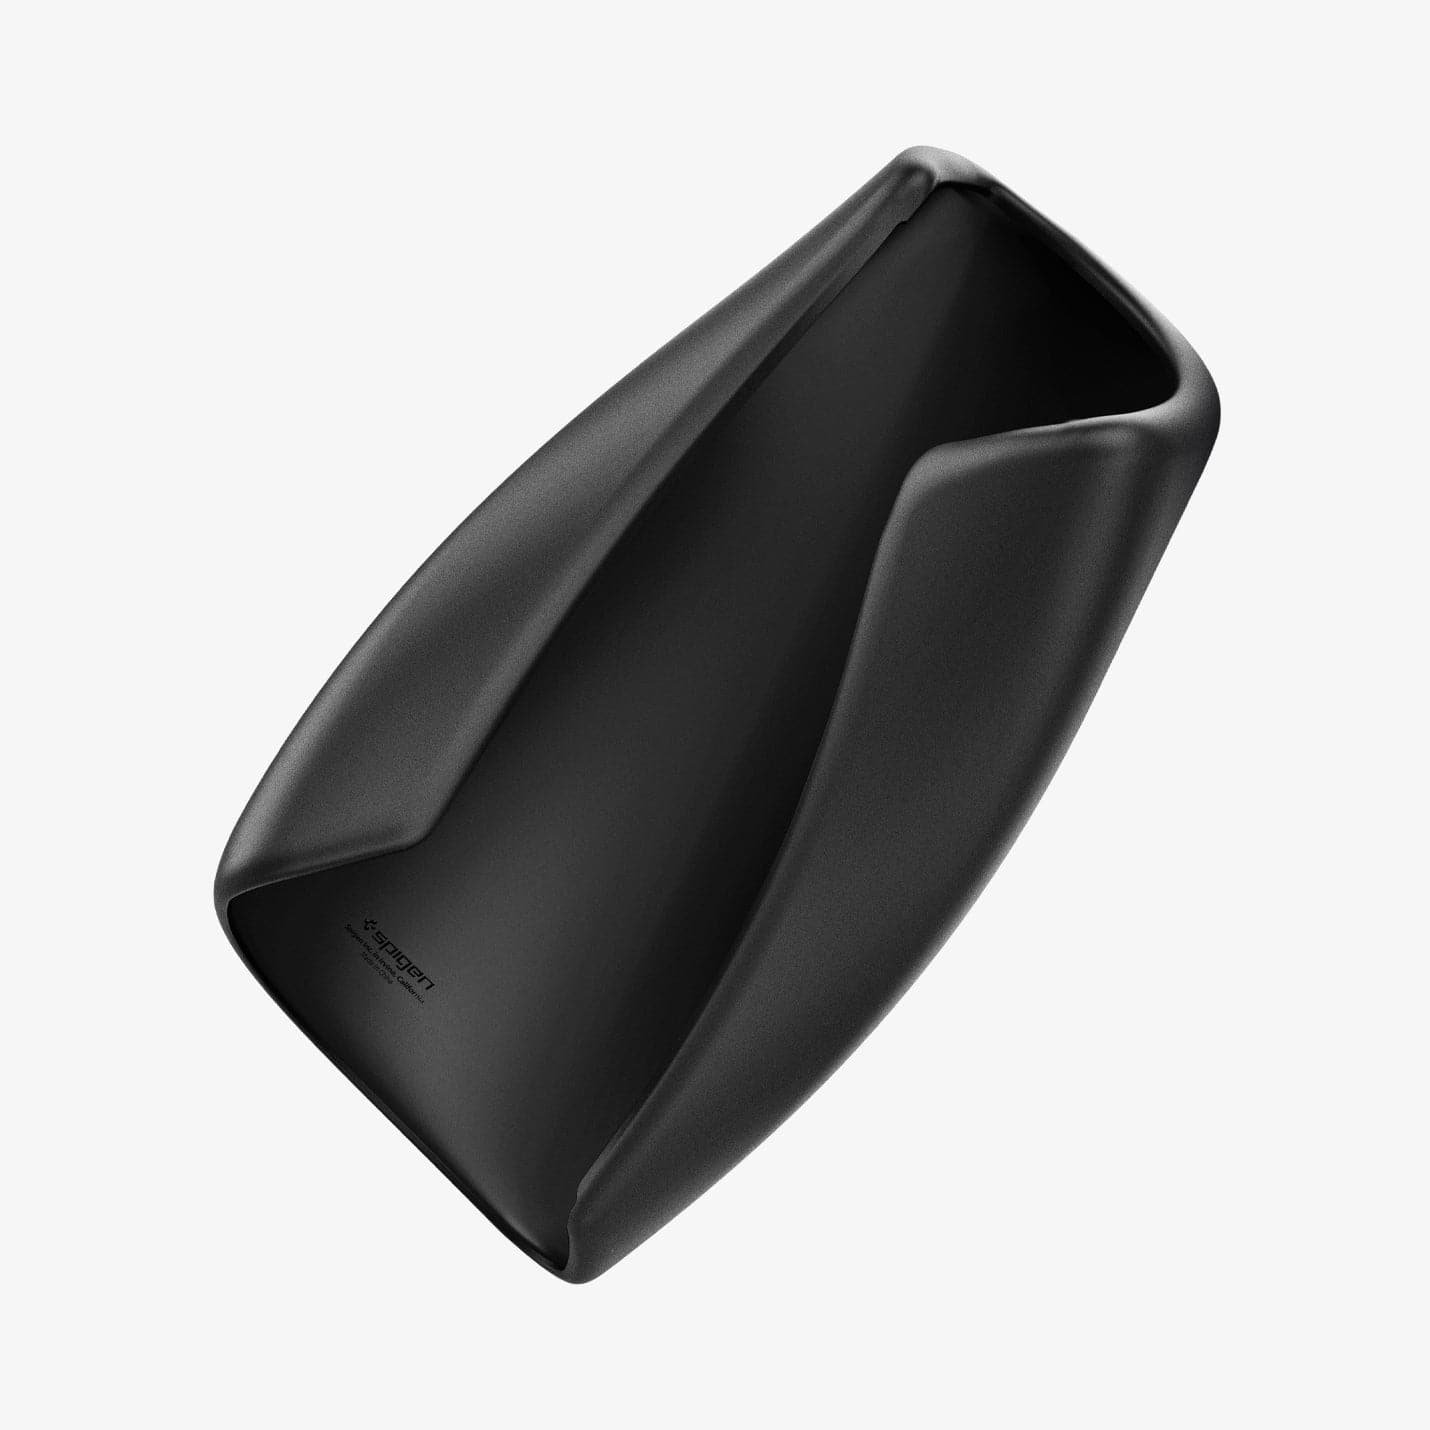 ACP06042 - Tesla Model 3 & Y Armrest Cover in black showing the cover bending to show the flexibility